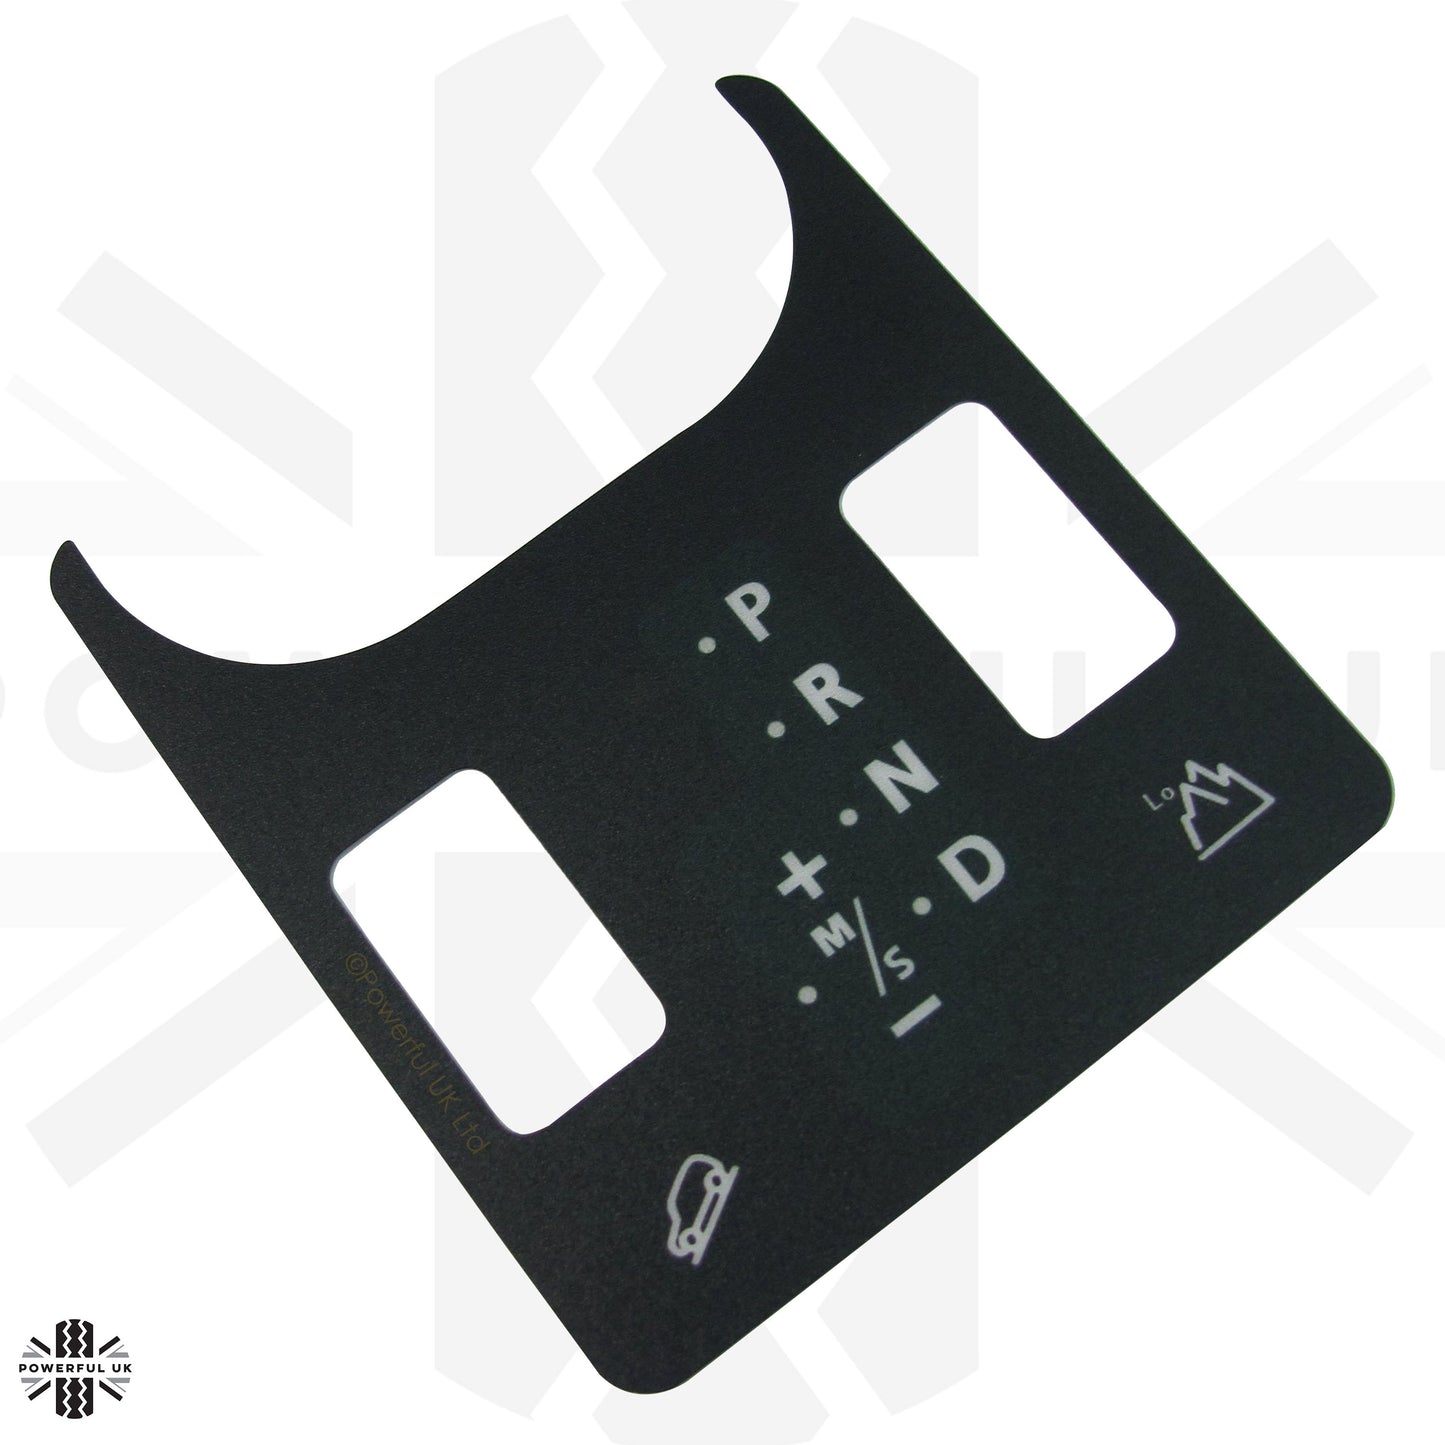 Gear Selector Replacement Surround Sticker - Black - for Range Rover L322